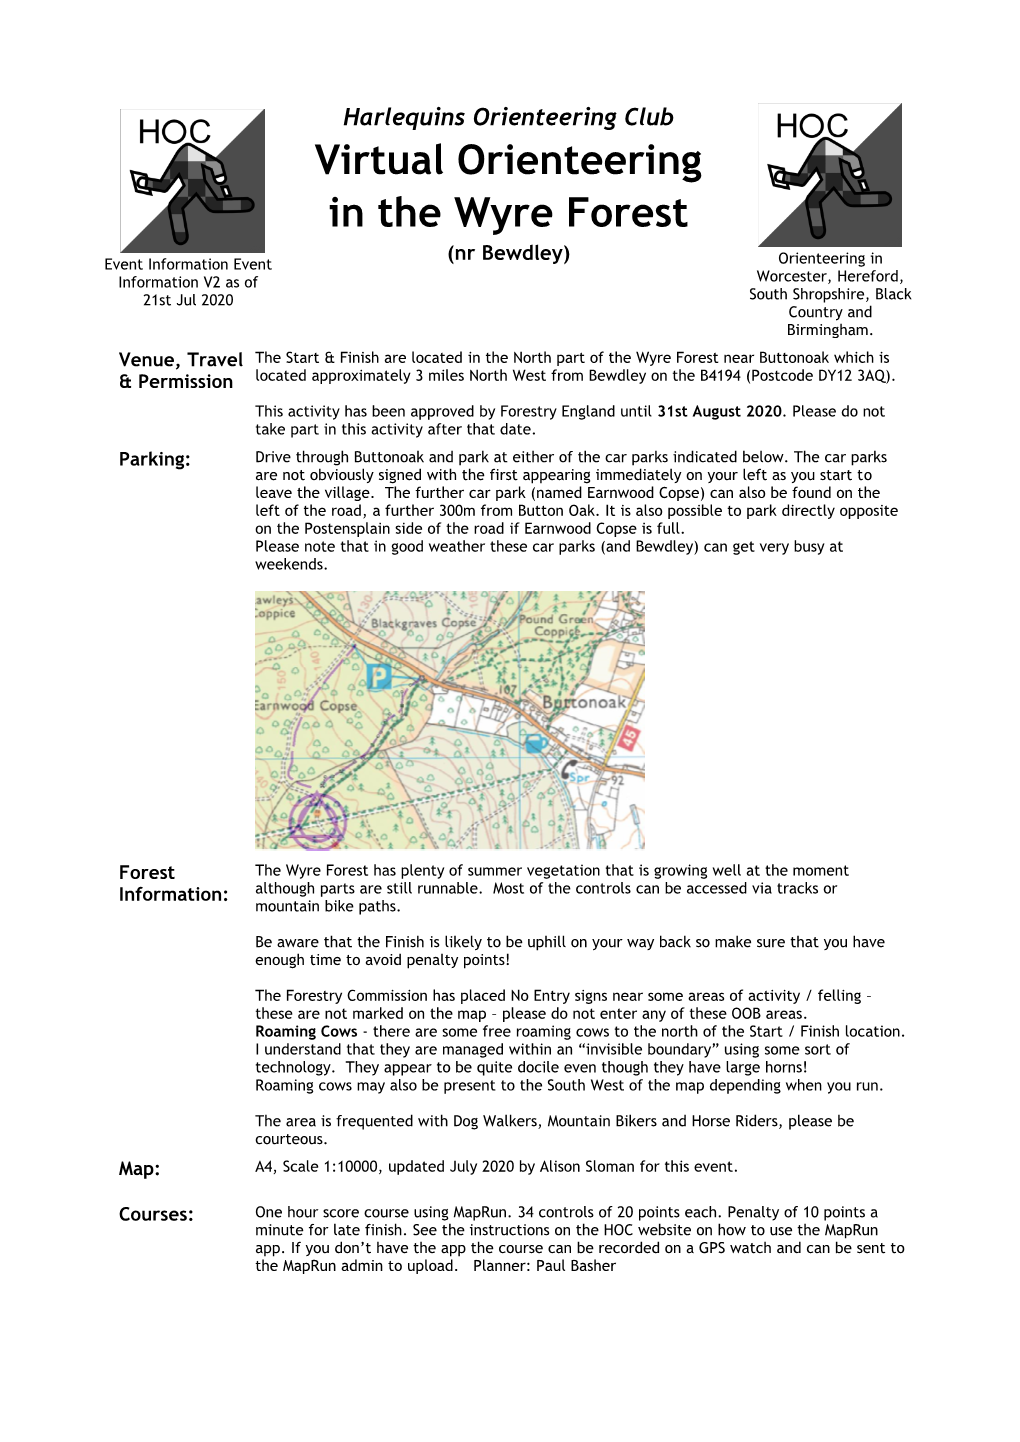 Virtual Orienteering in the Wyre Forest